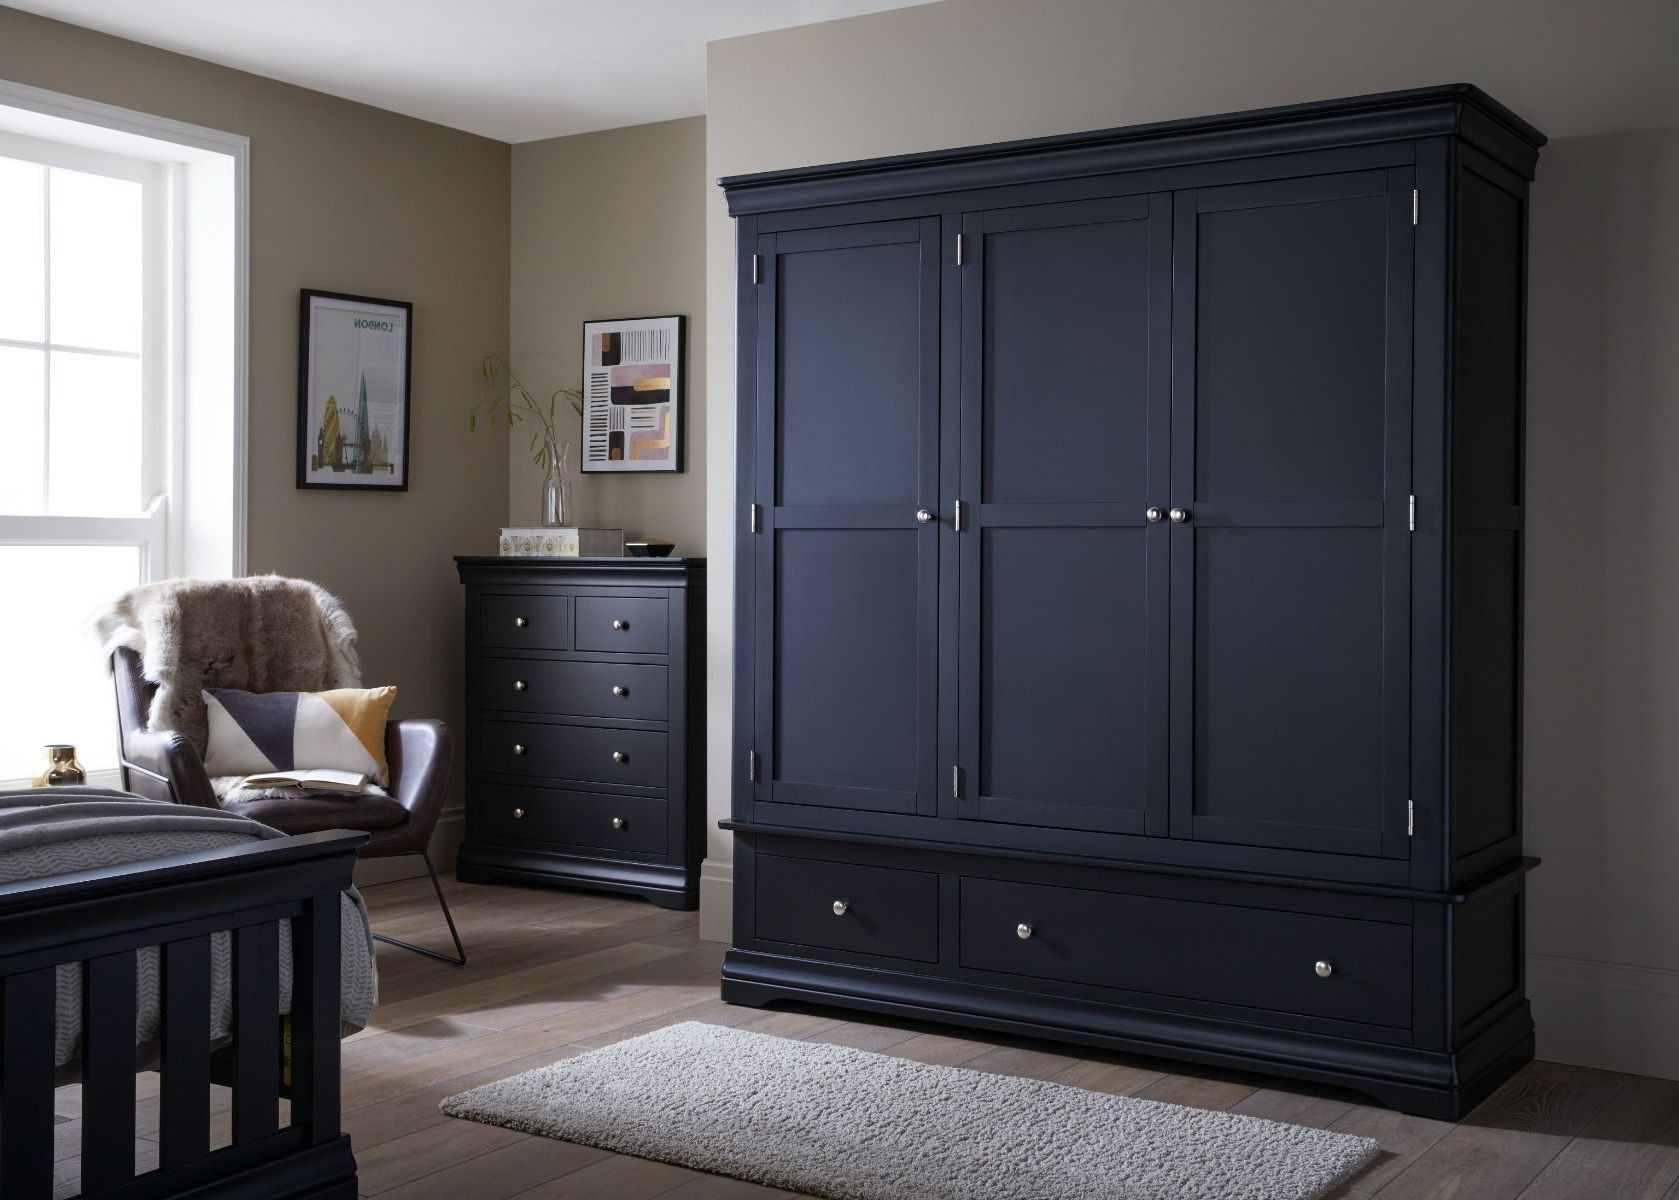 Toulouse Black Painted Large Triple Wardrobe With Drawer Intended For Wood Wardrobes (View 13 of 20)